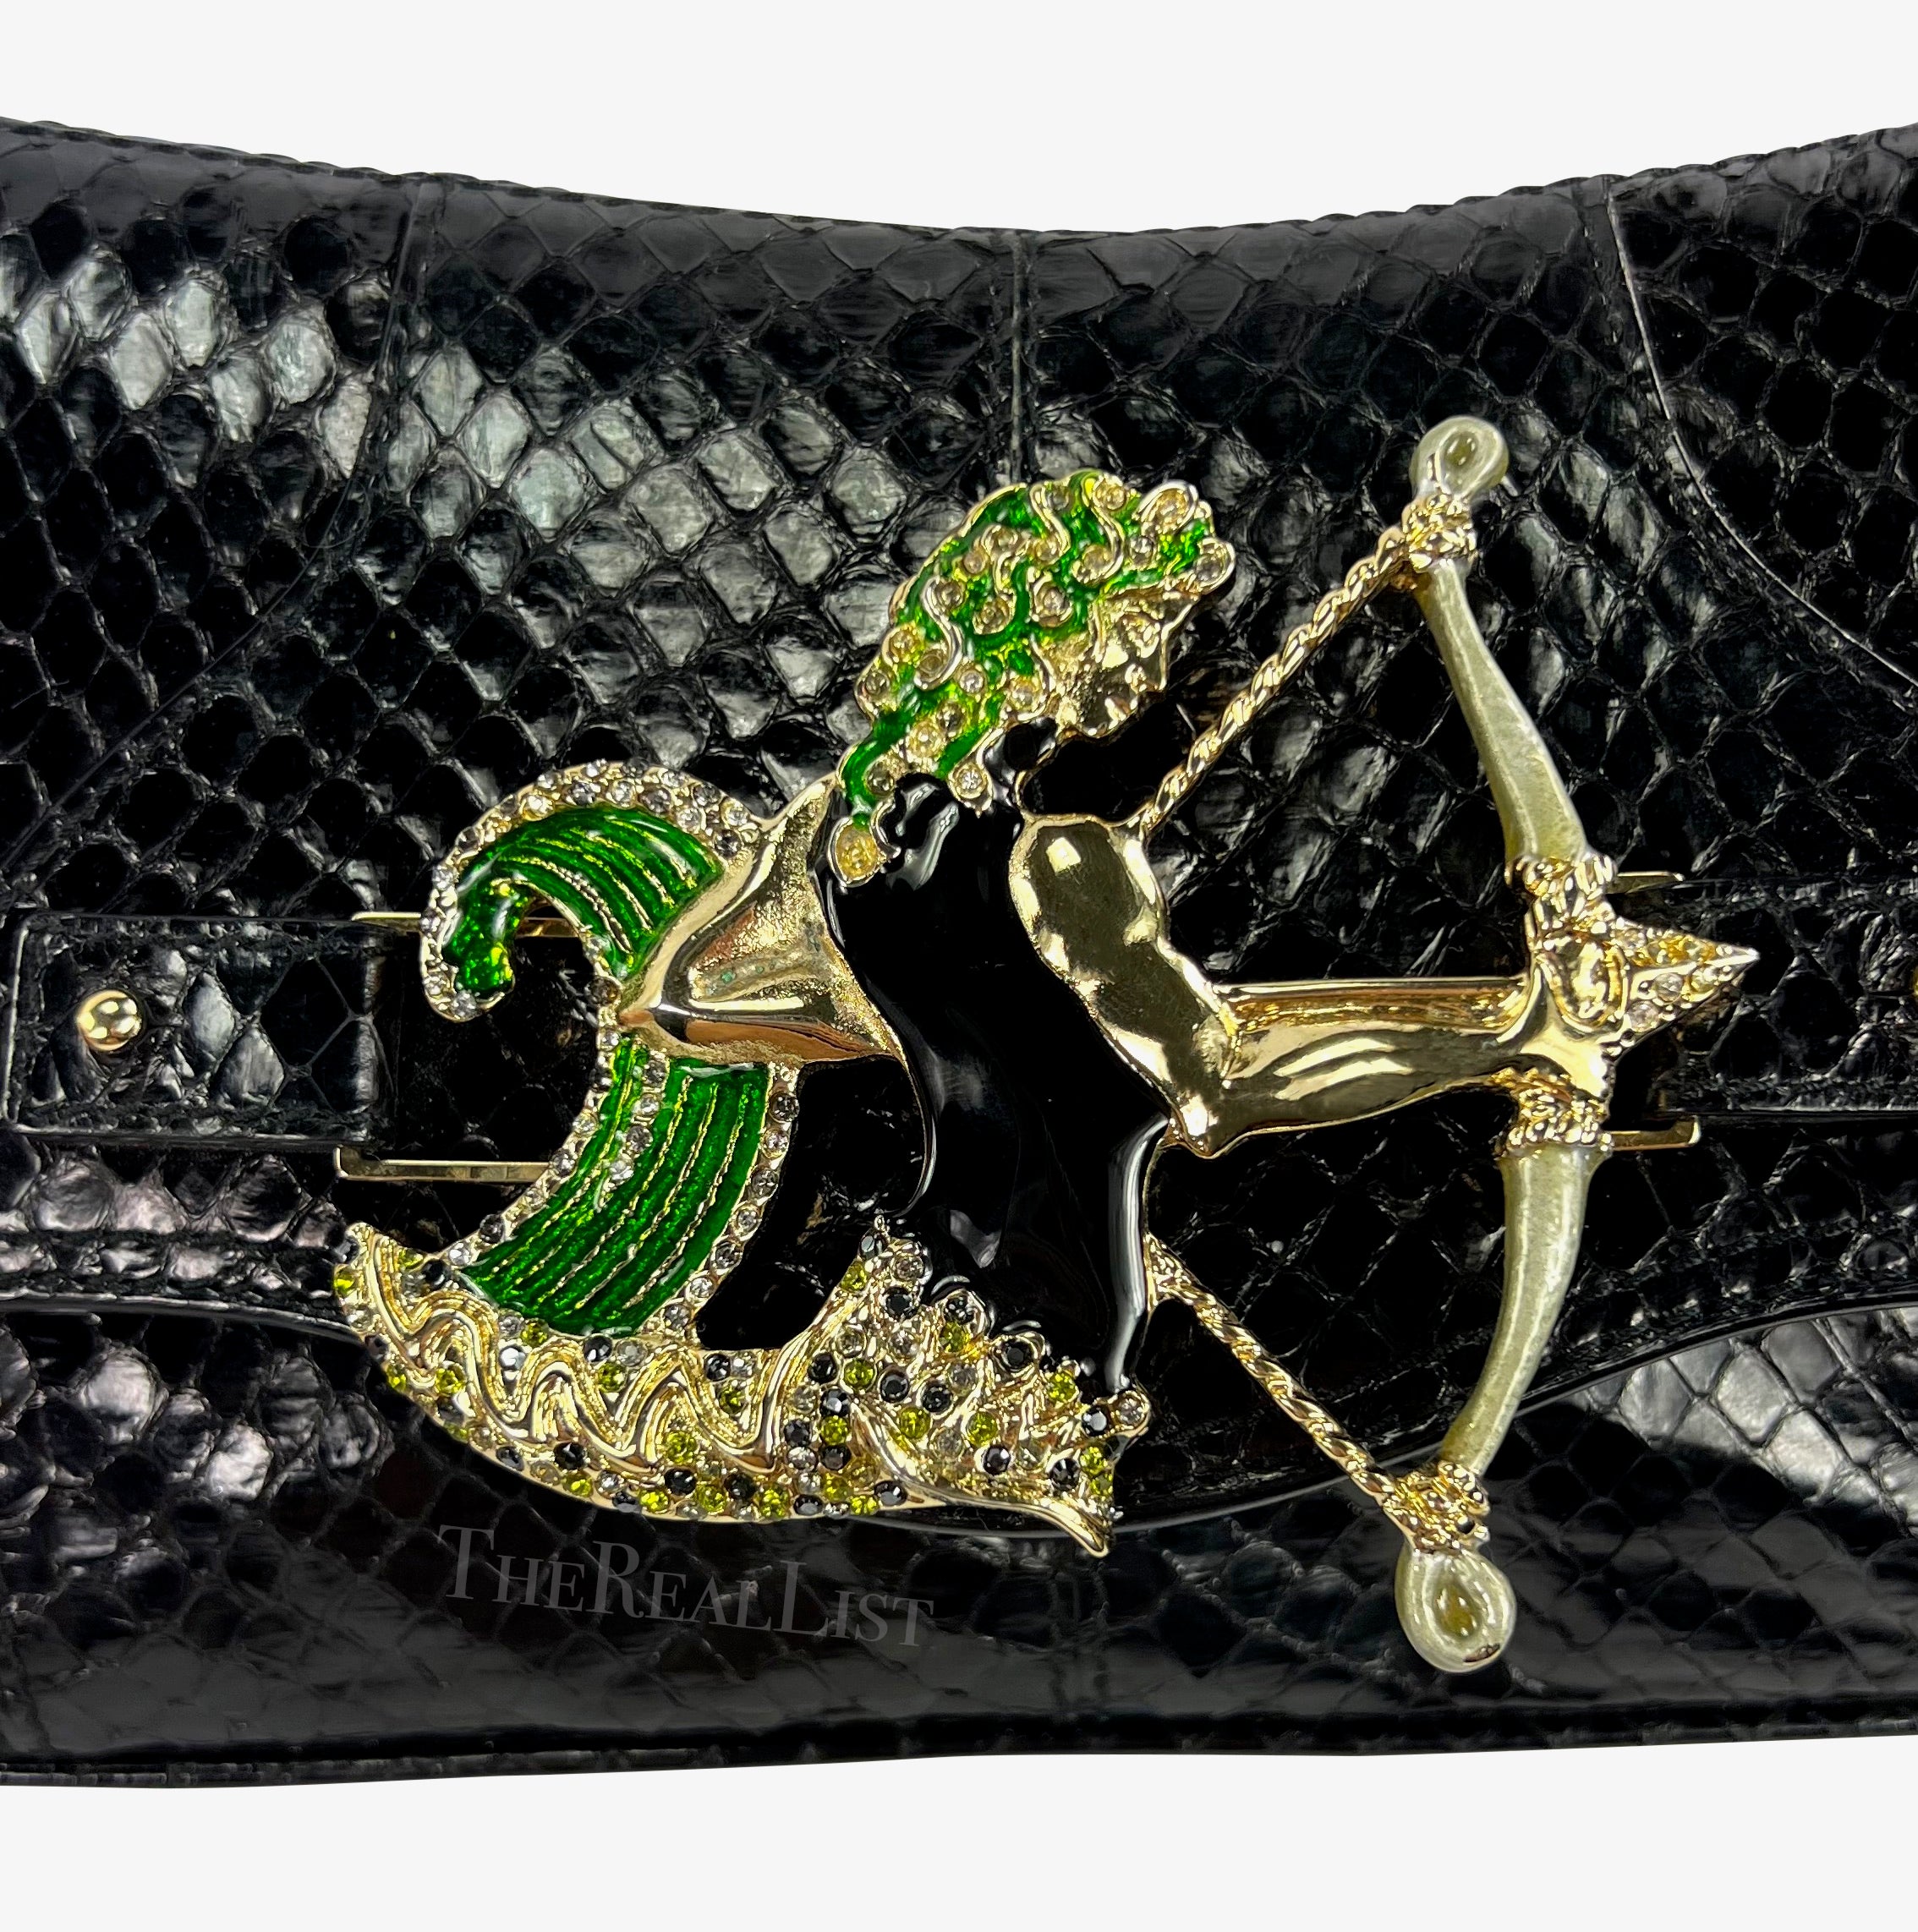 Presenting an incredible black snakeskin Dolce & Gabbana horoscope shoulder bag. Elevate your style with this exceptional black snakeskin Dolce & Gabbana horoscope shoulder bag, a coveted piece from the Fall/Winter 2004 collection. Meticulously